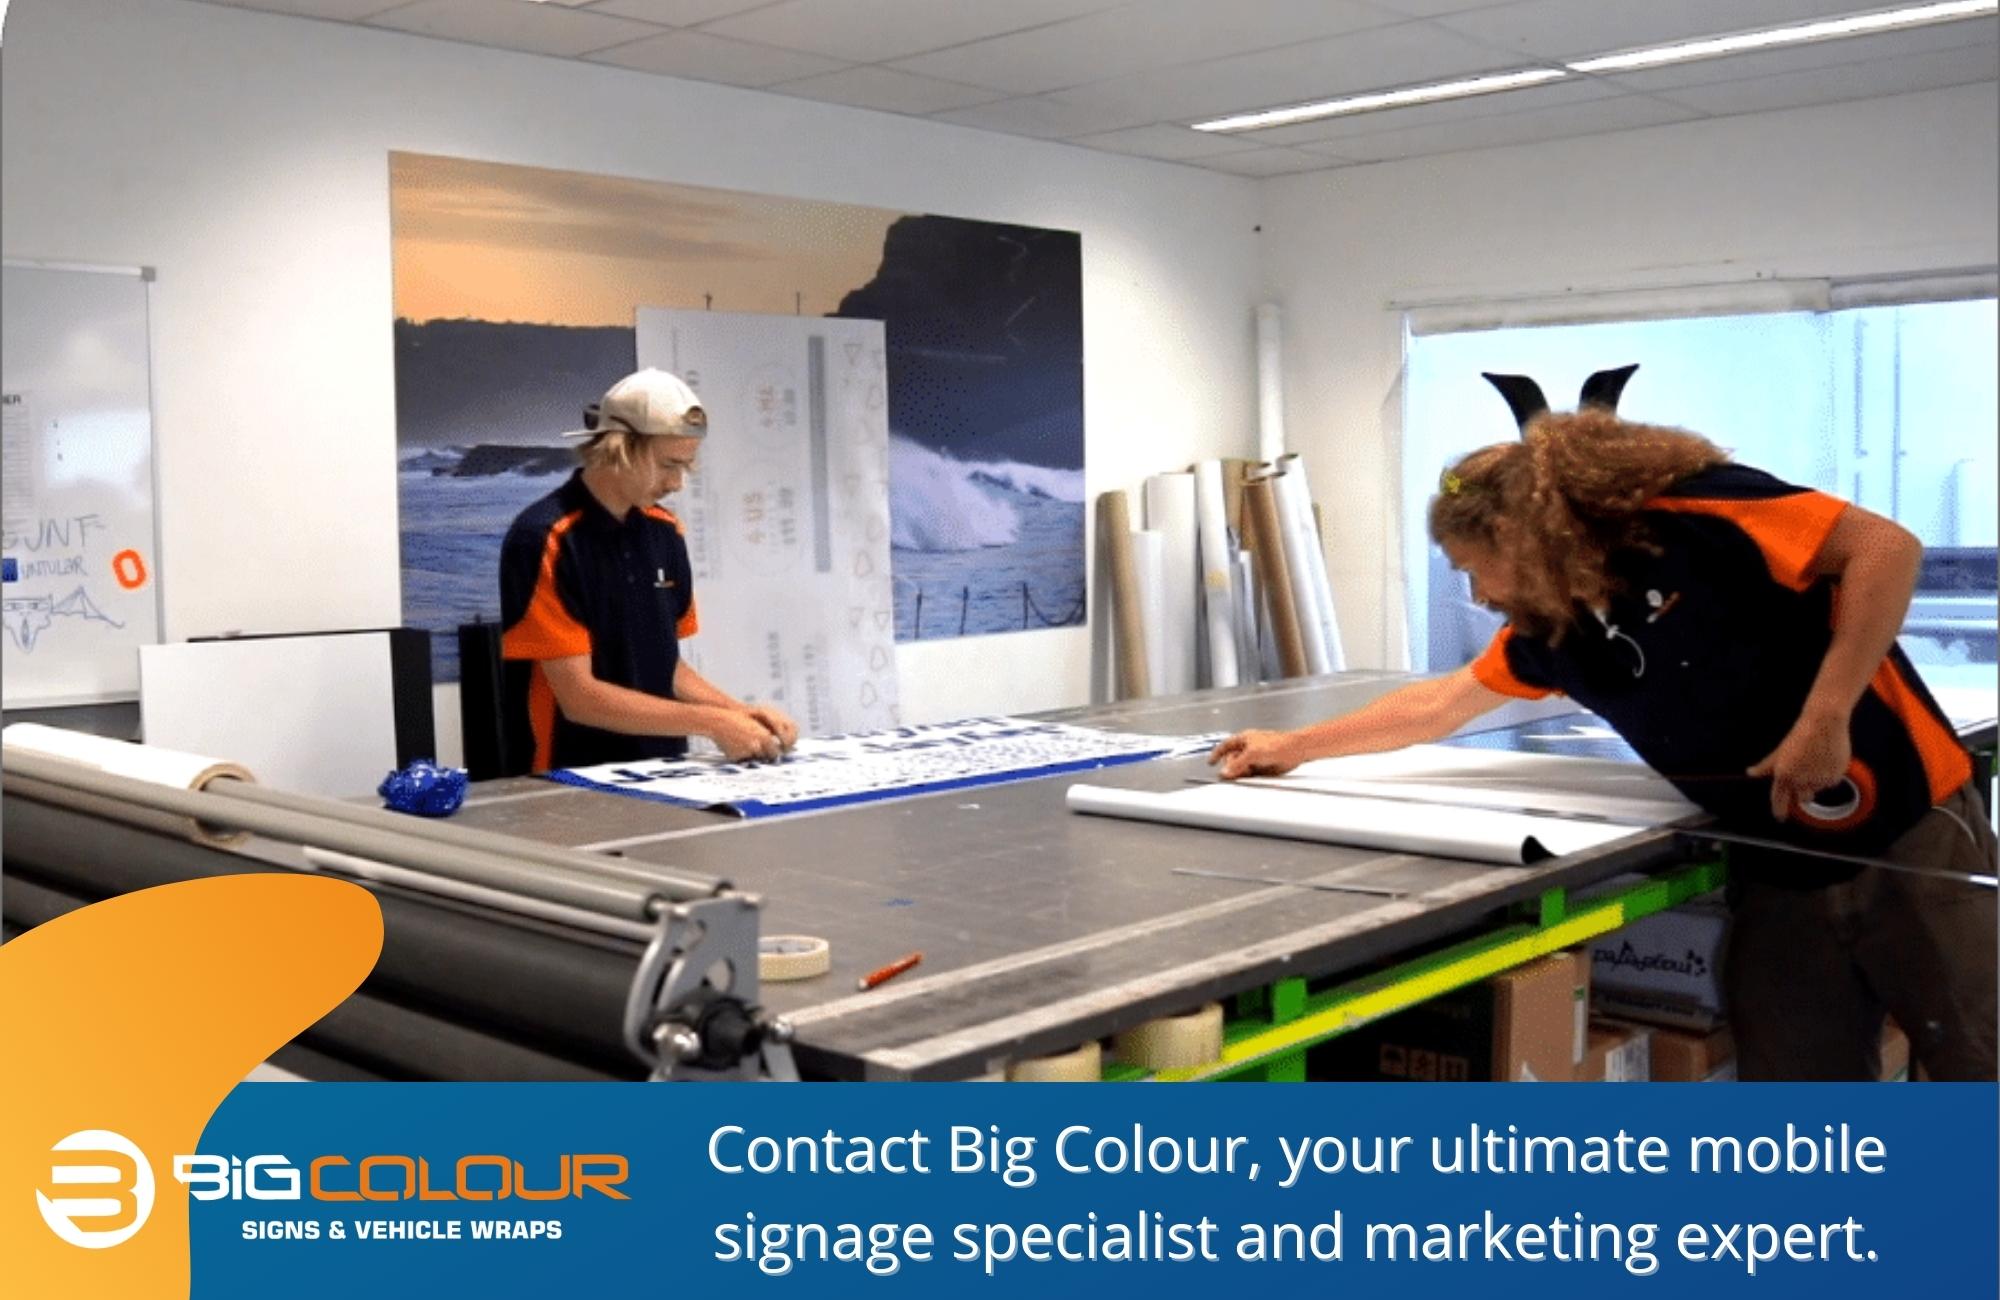 Contact Big Colour, your ultimate mobile signage specialist and marketing expert.